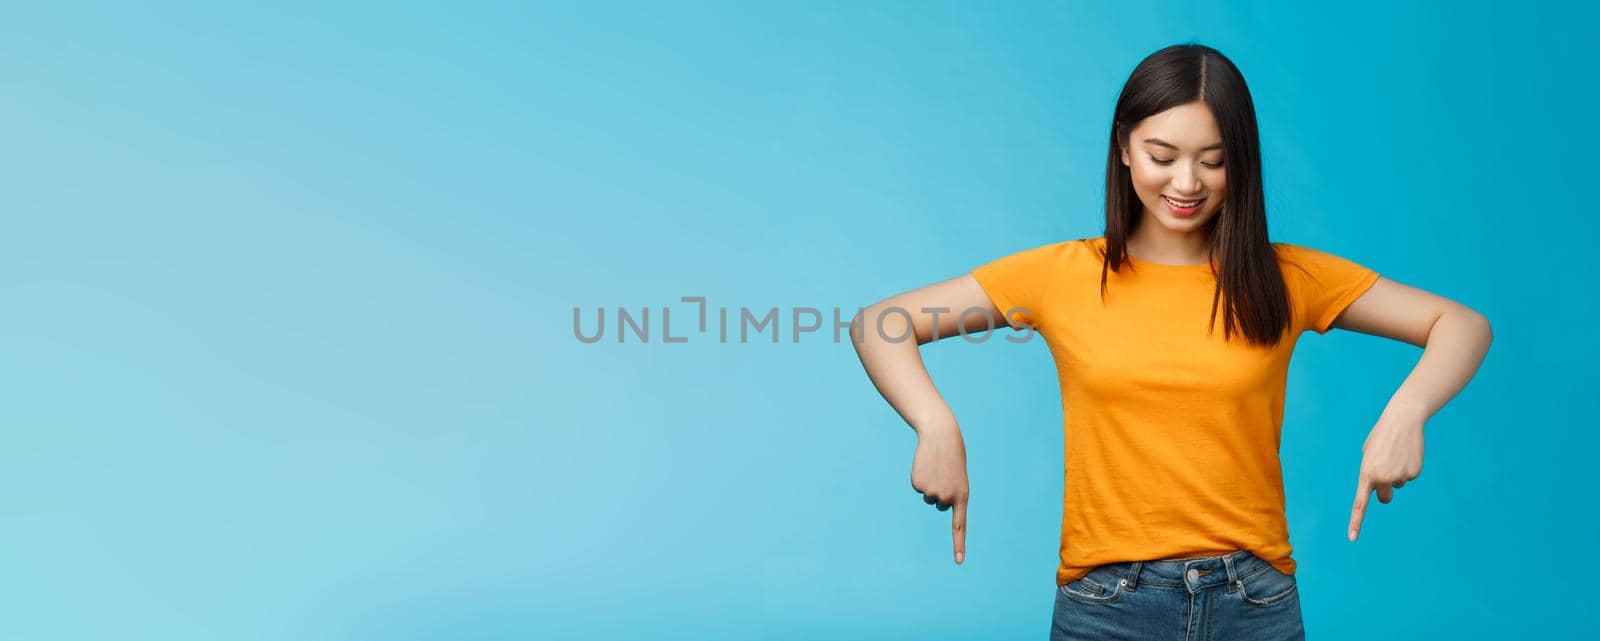 Cute tender feminine asian girl dark haircut look pointing down contemplating interesting product, stare curiously smiling amused, express enthusiasm interest try-out cool thing, blue background.